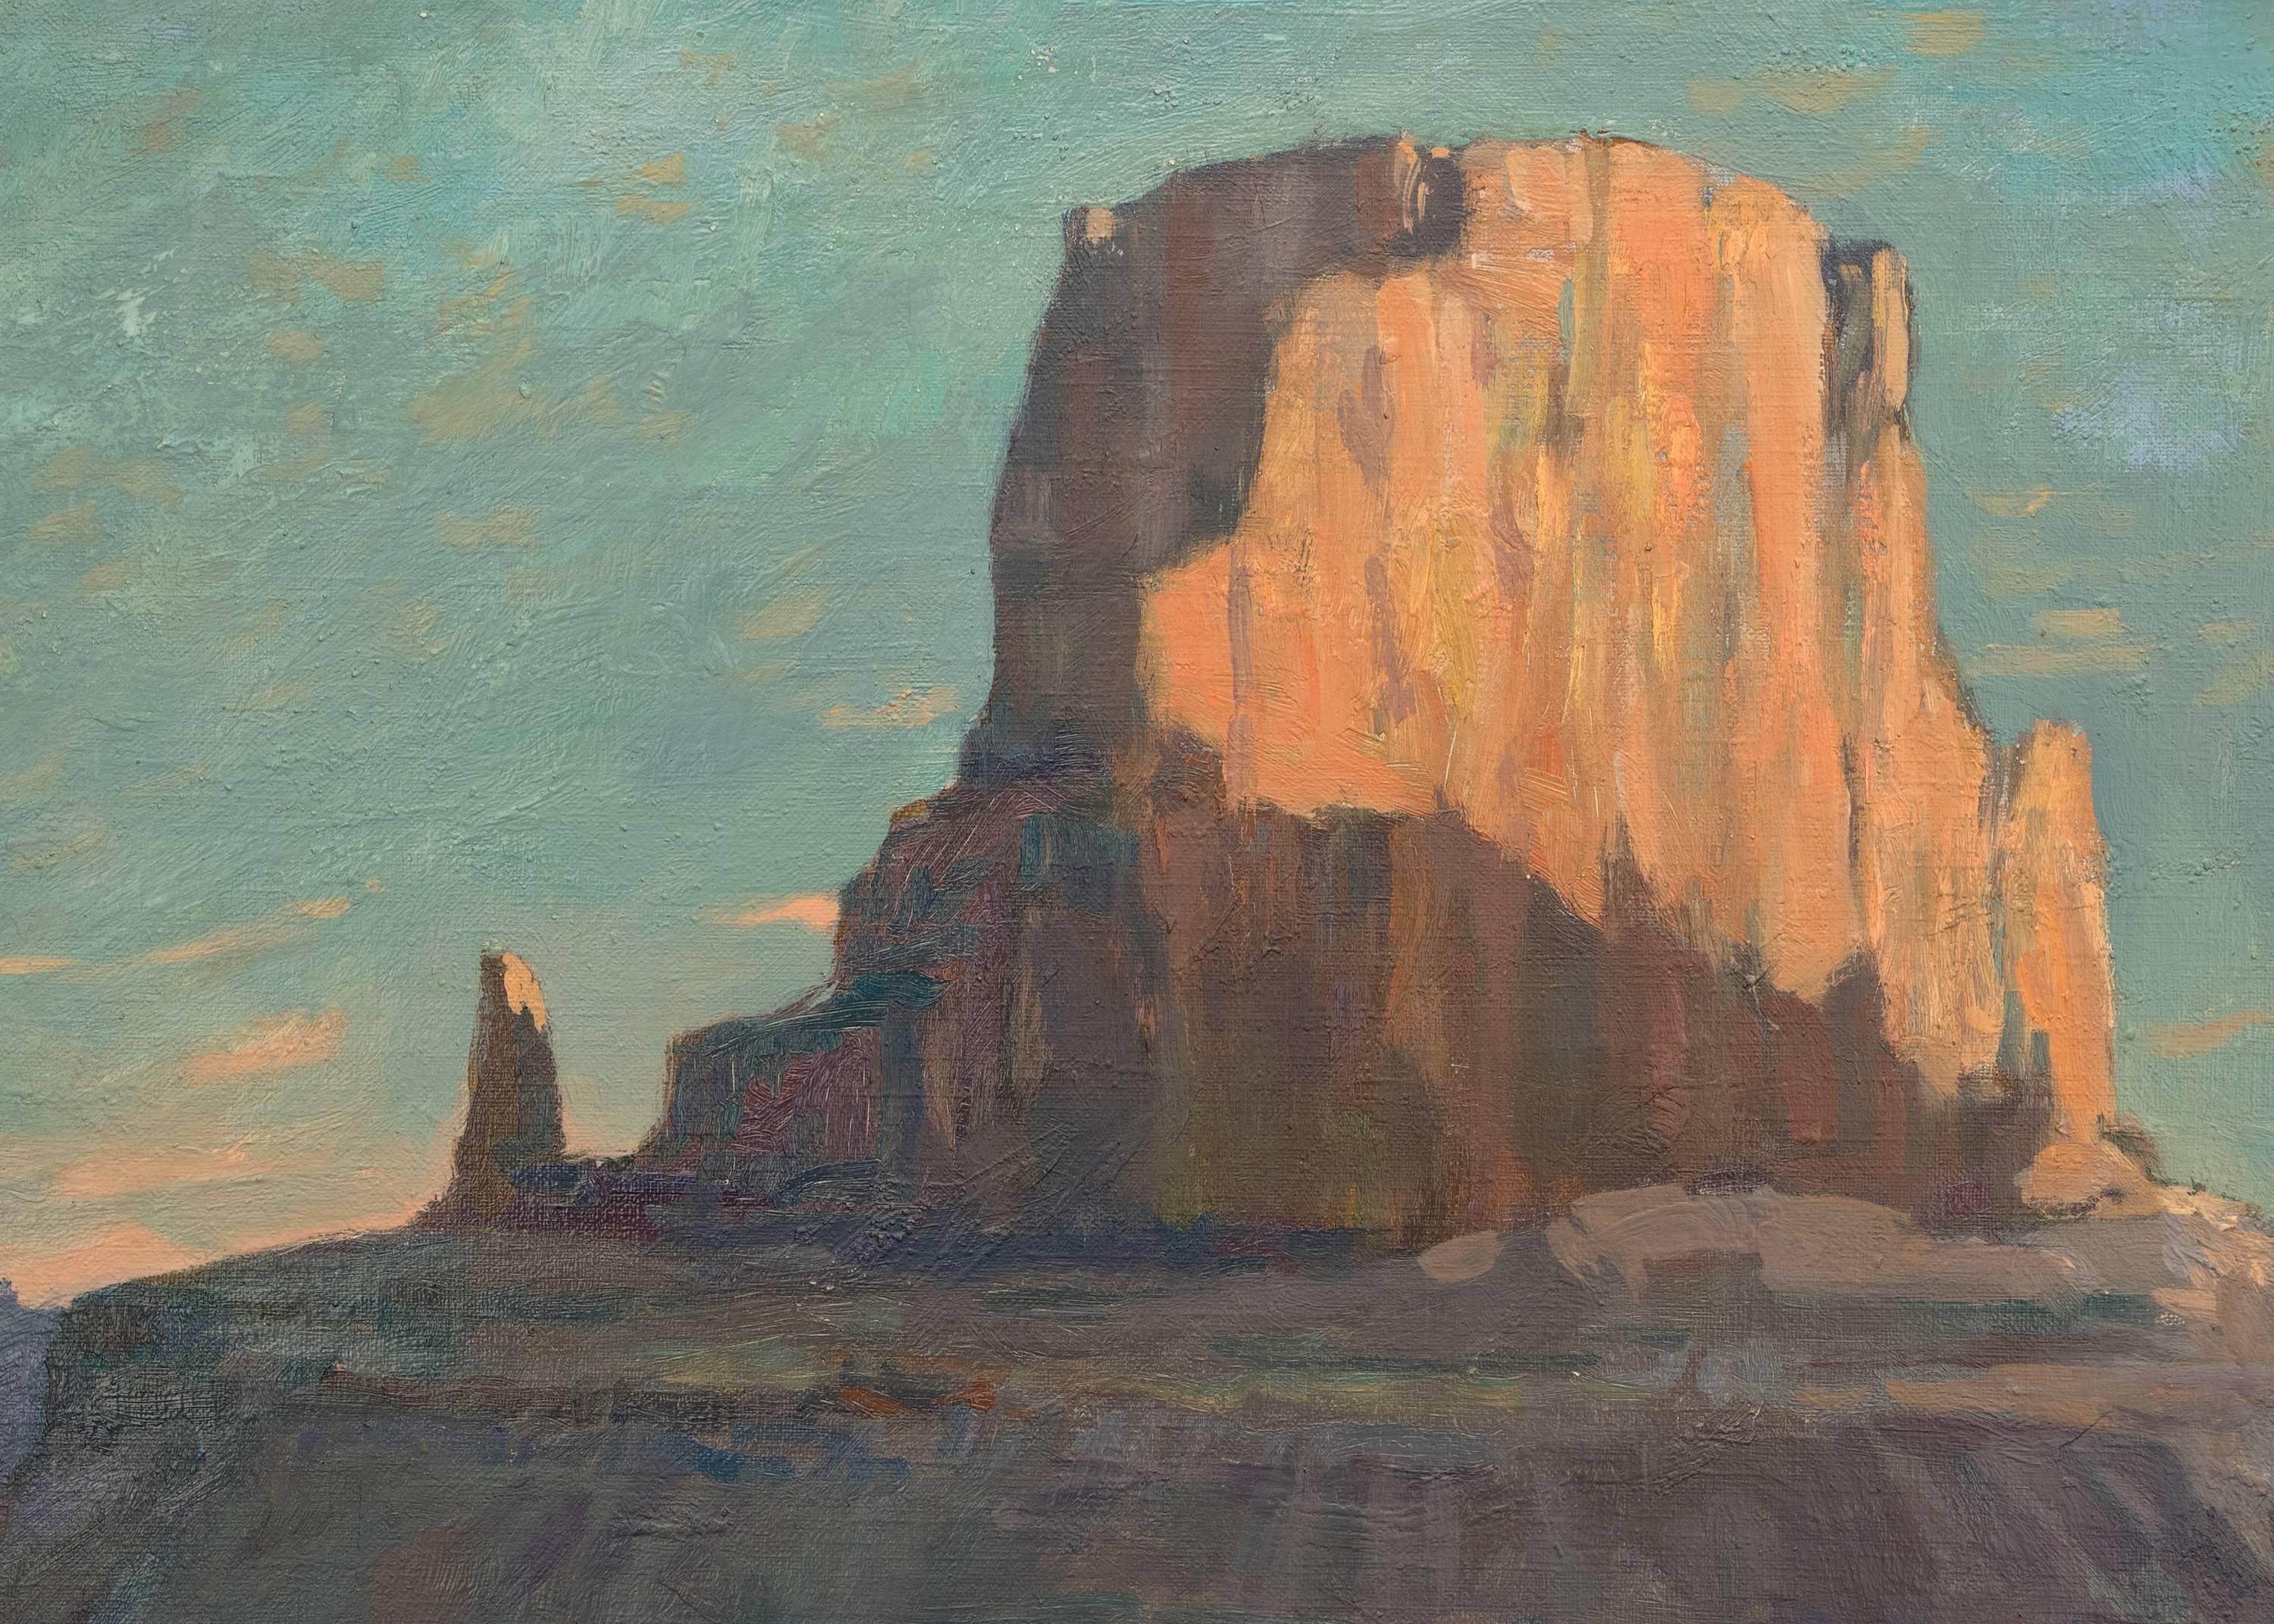 Navajo with Sheep - Brown Landscape Painting by John Modesitt